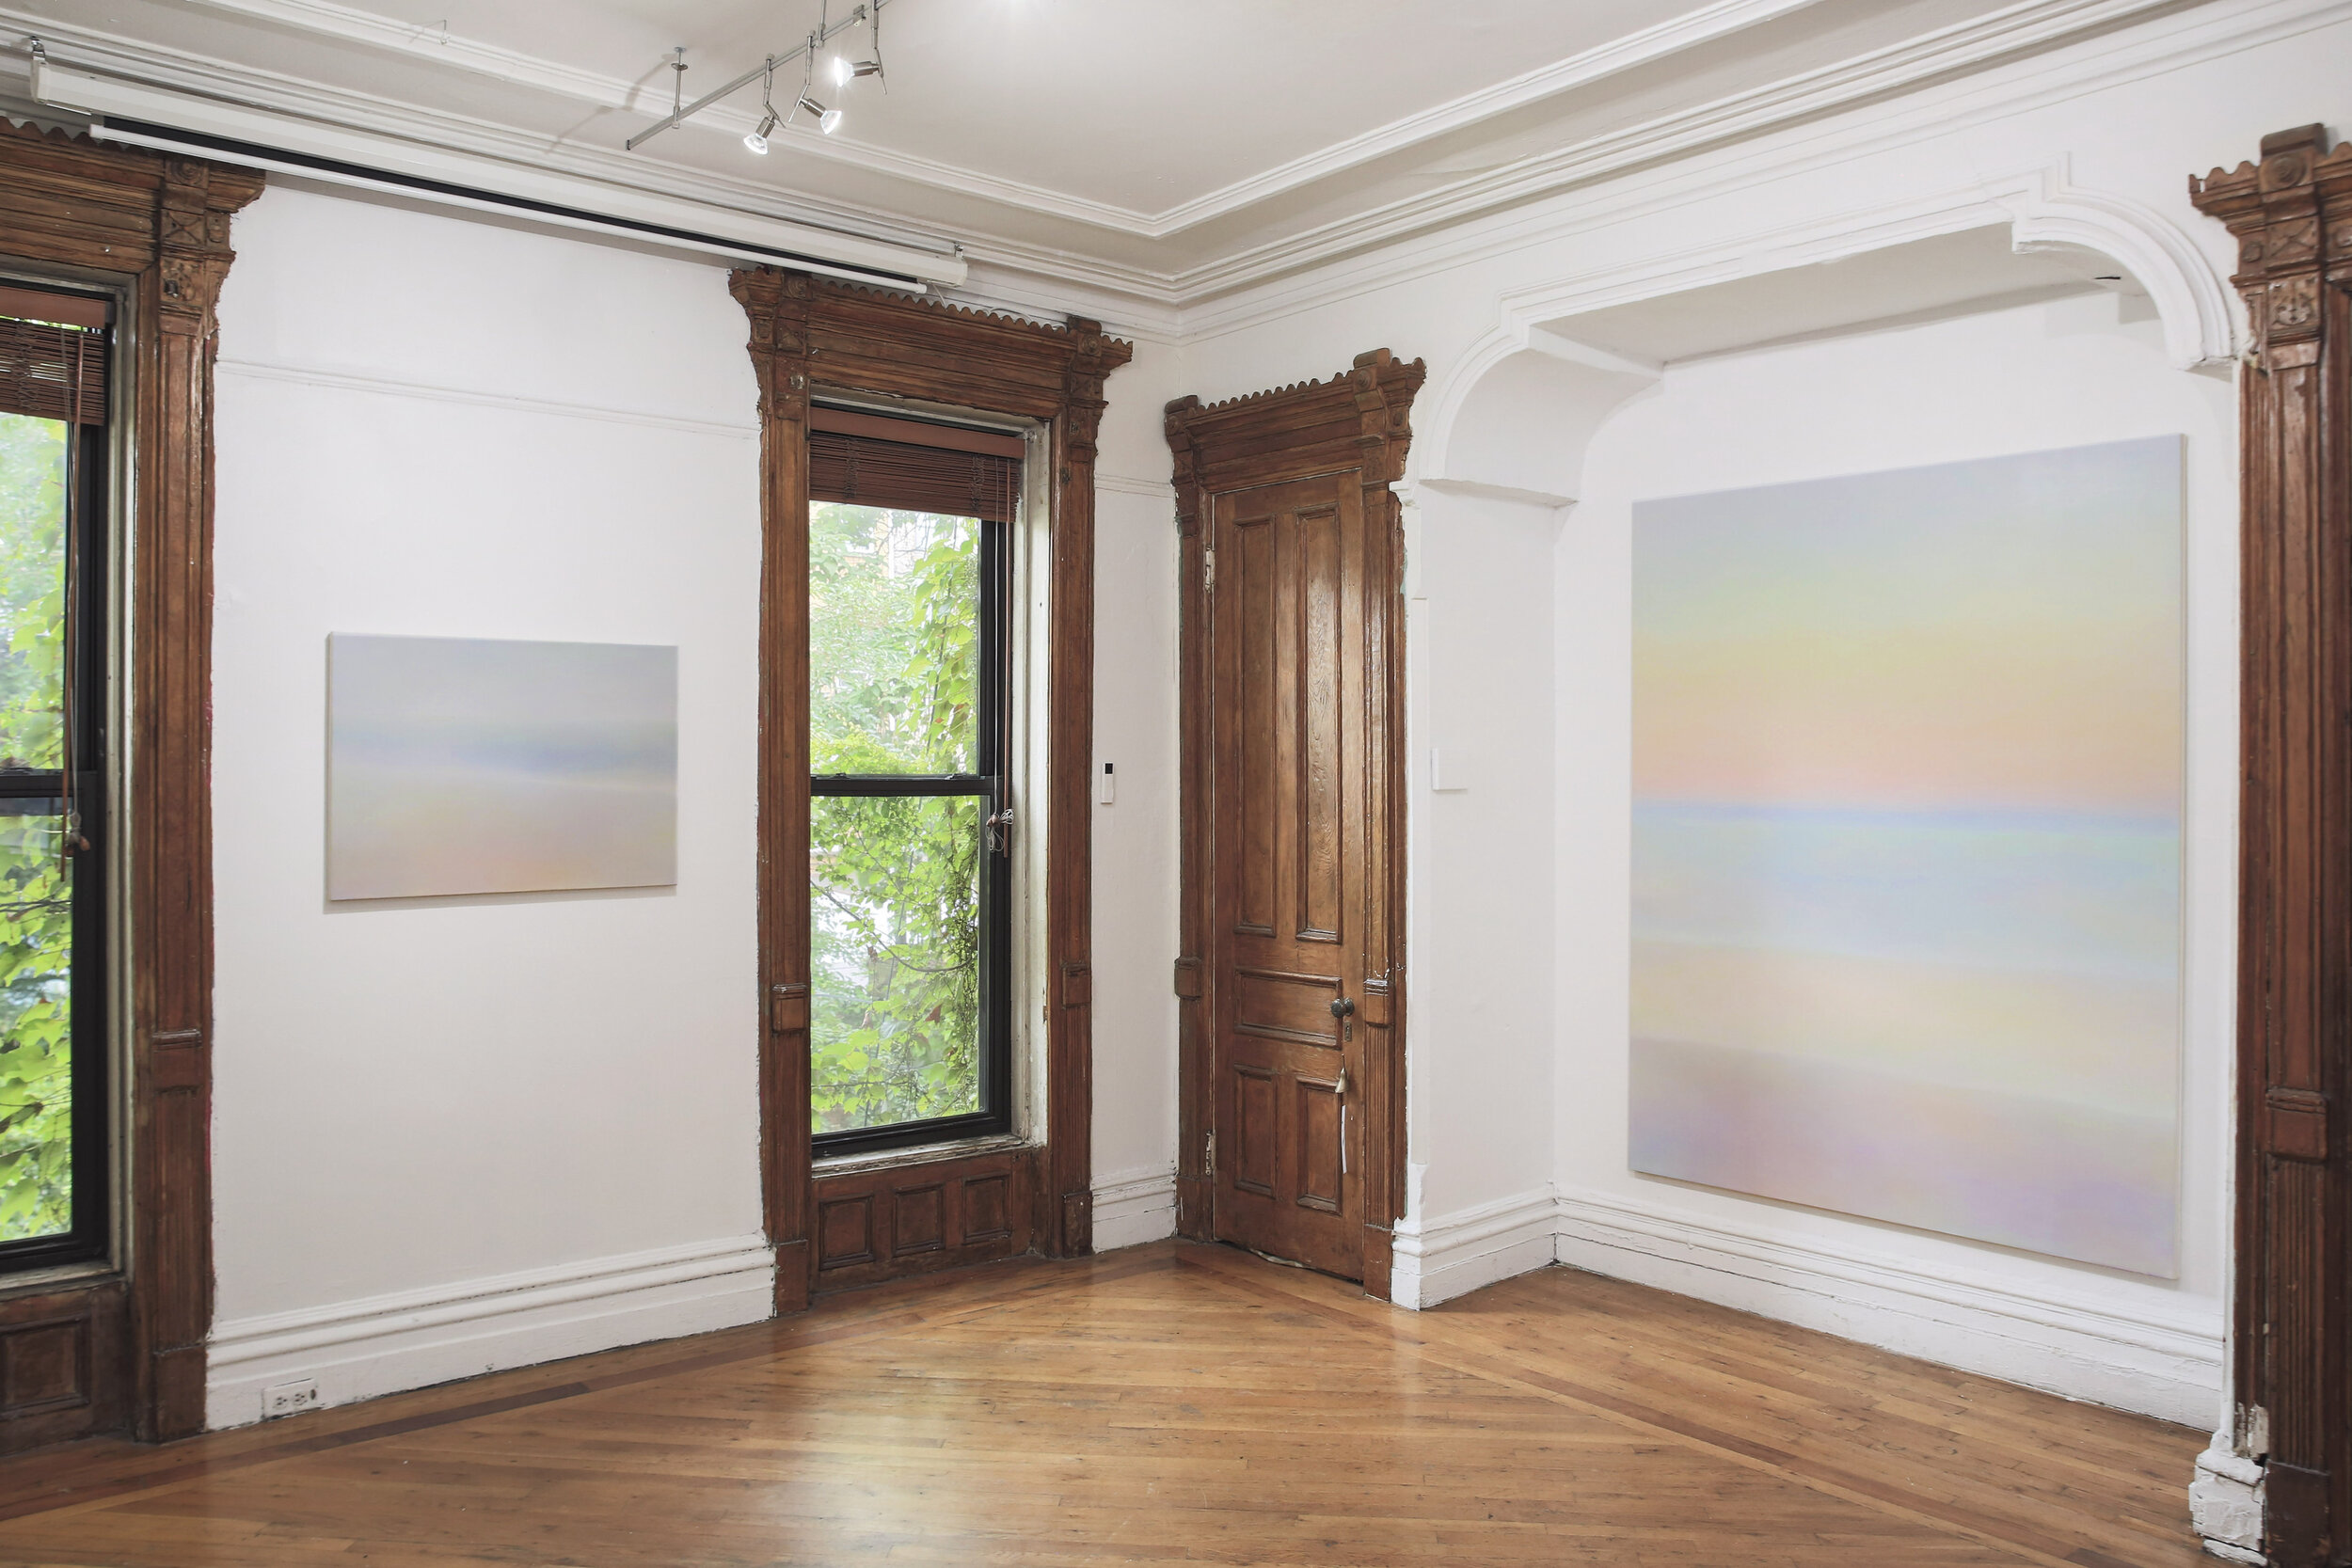   Shuling Guo: 5—6 pm  installation view. Photography by Lynn Hai ©Shuling Guo, courtesy Fou Gallery    